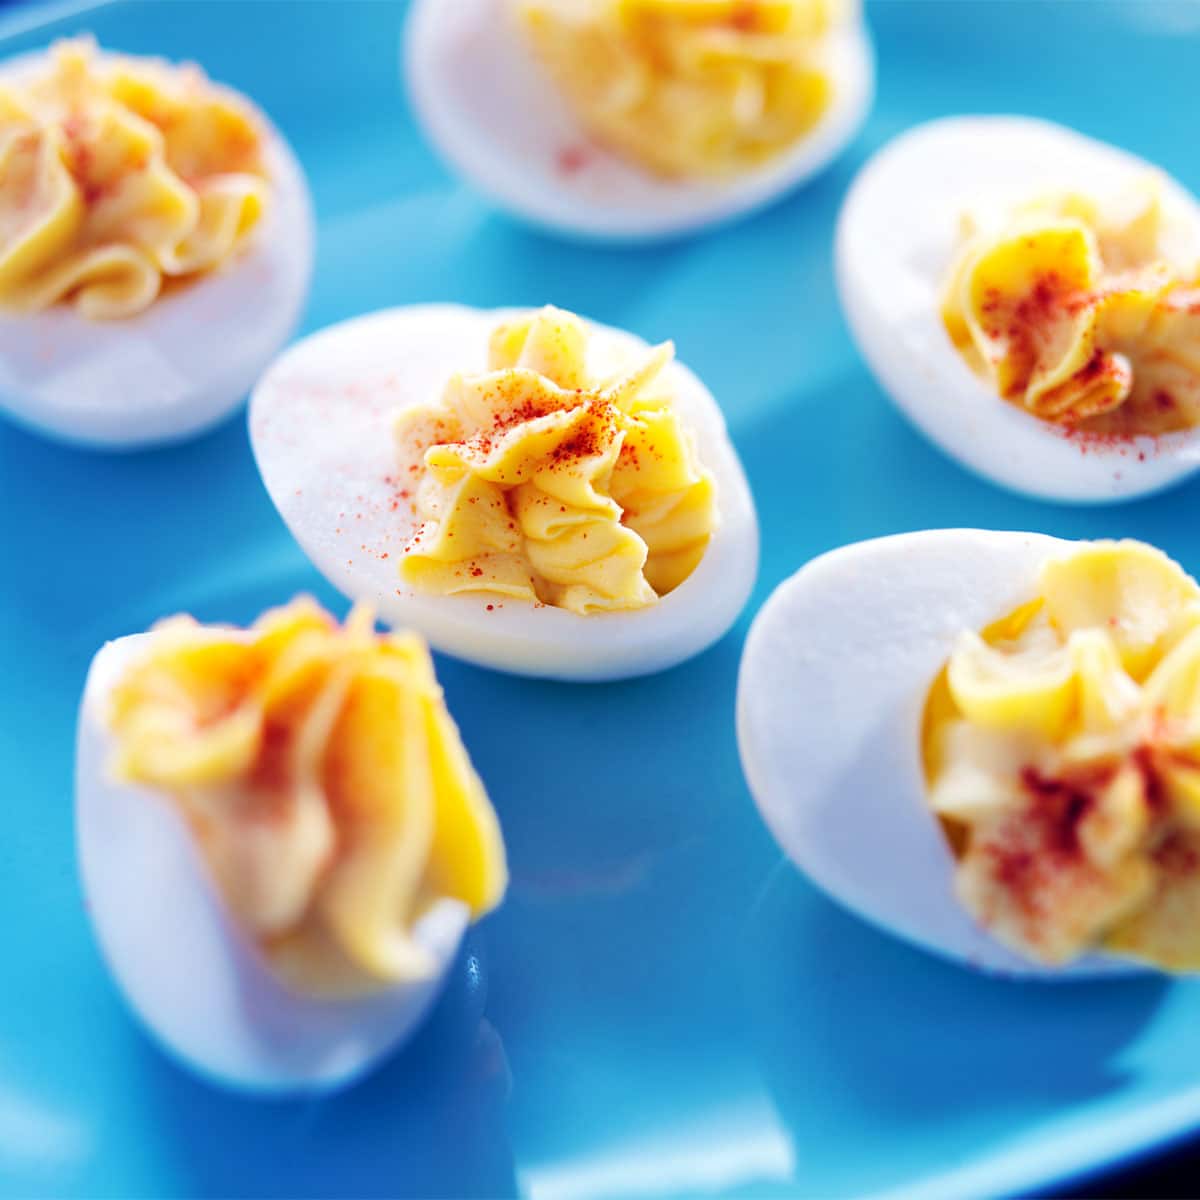 If you love deviled eggs but don't want to eat them all in one sitting, you're lucky – you can freeze them! Just follow a few simple steps to ensure they stay safe and delicious.